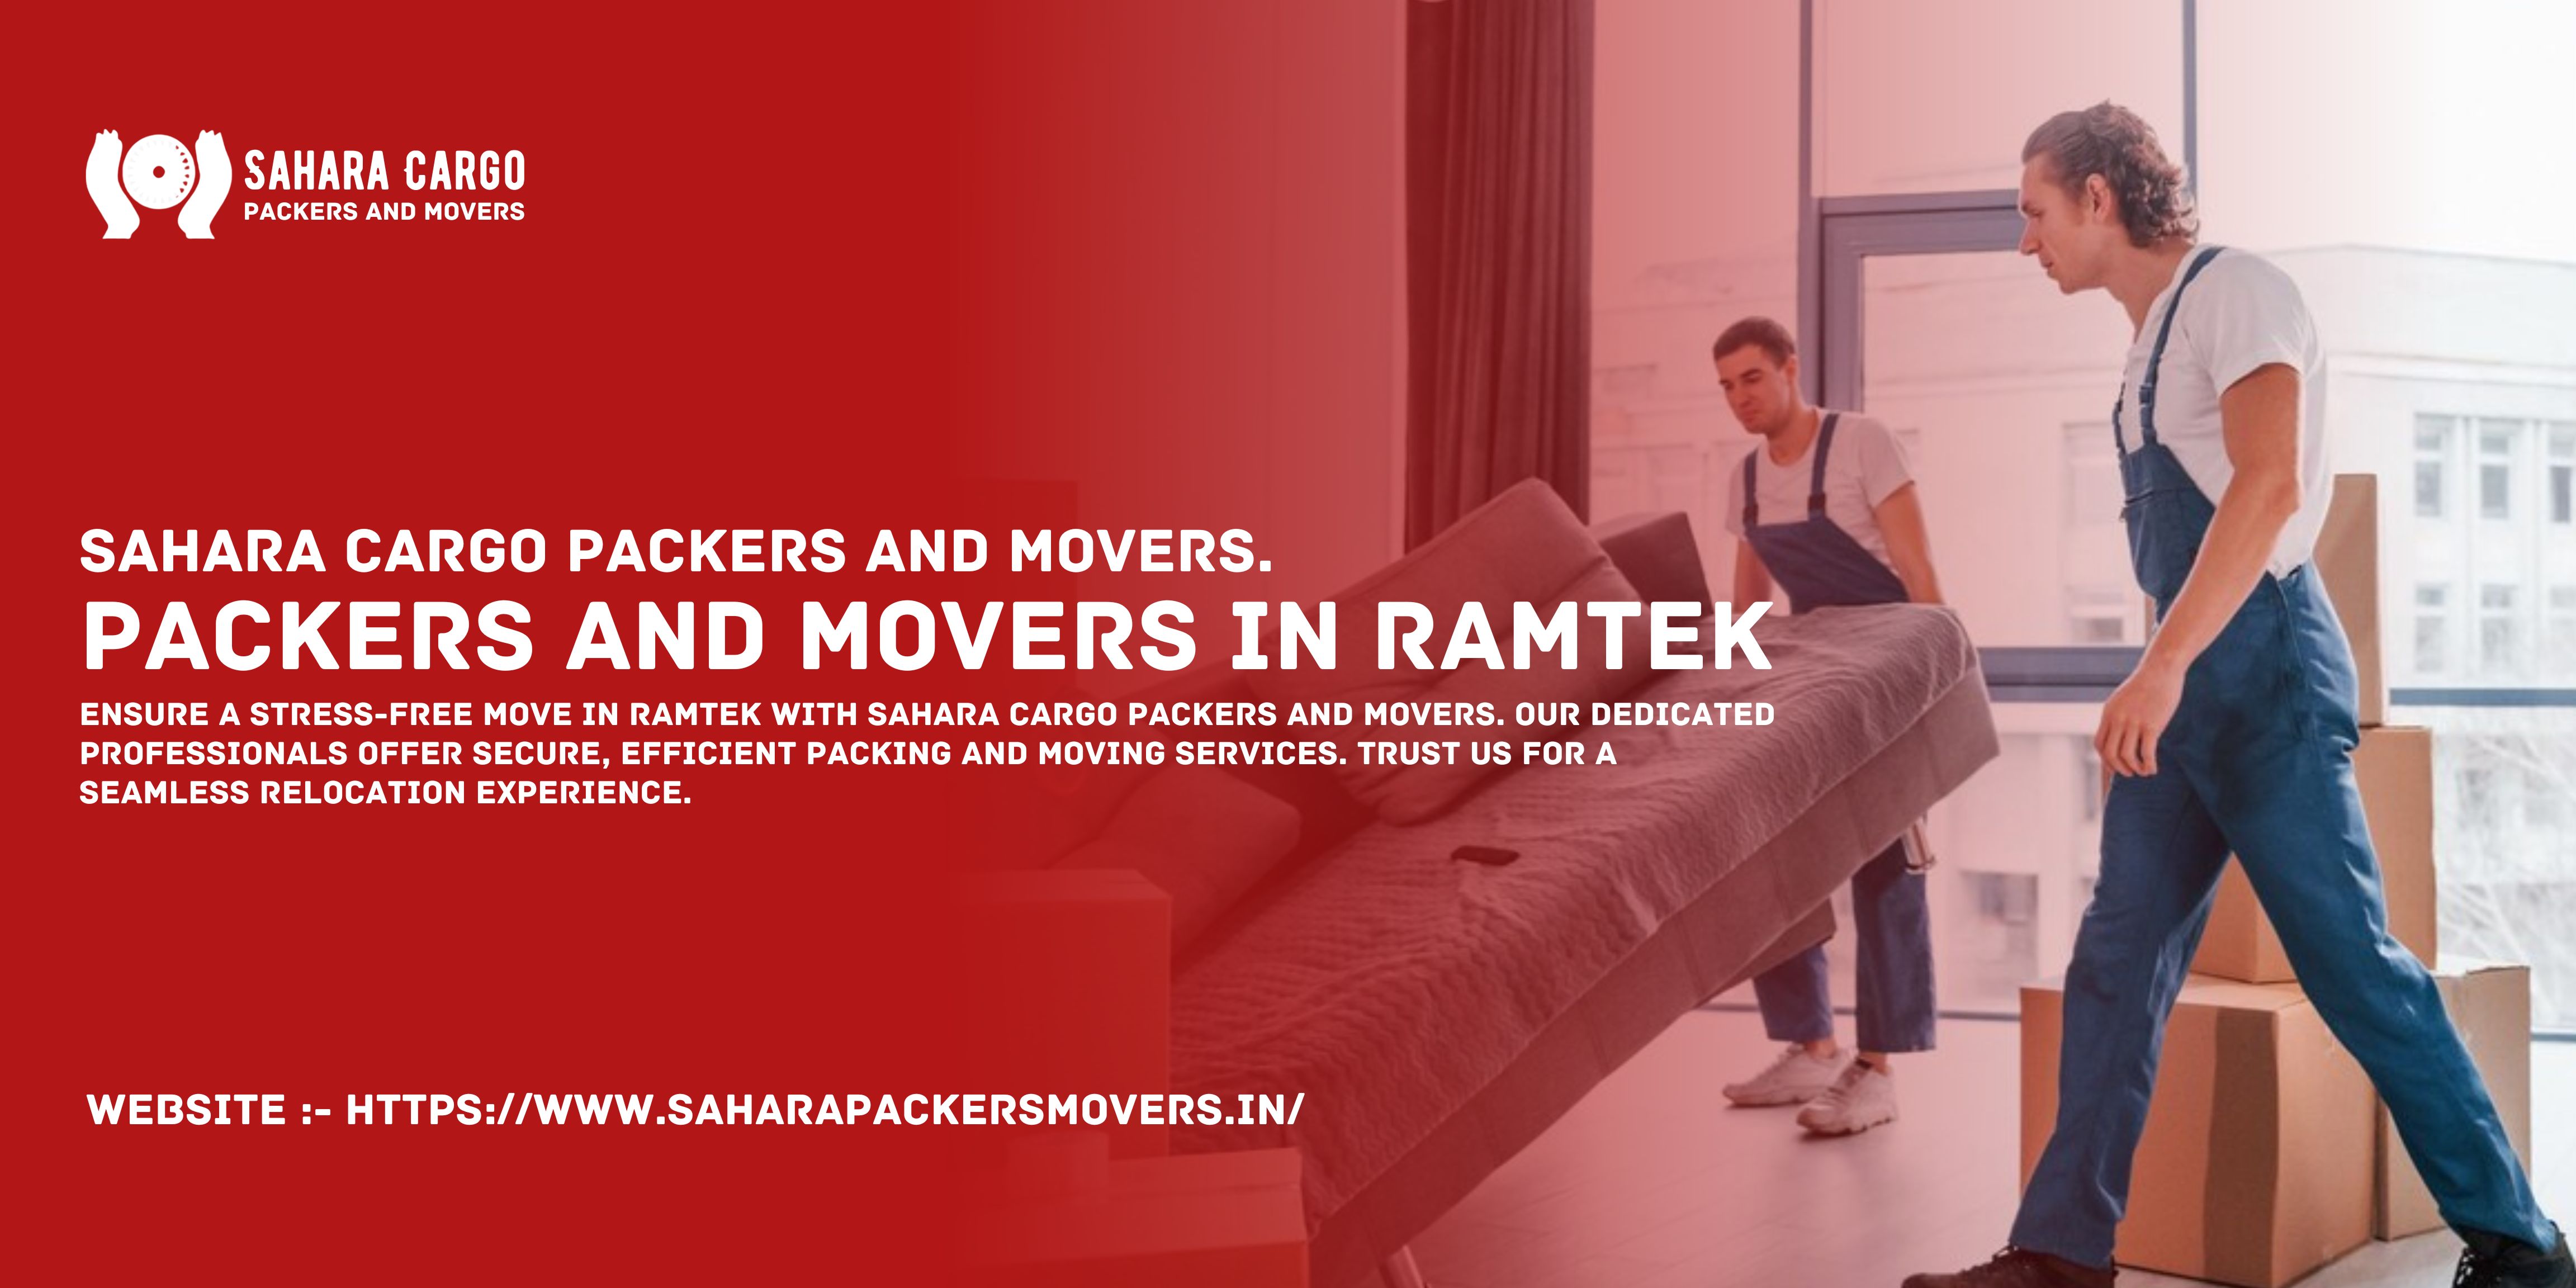 Packers And Movers In Ramtake